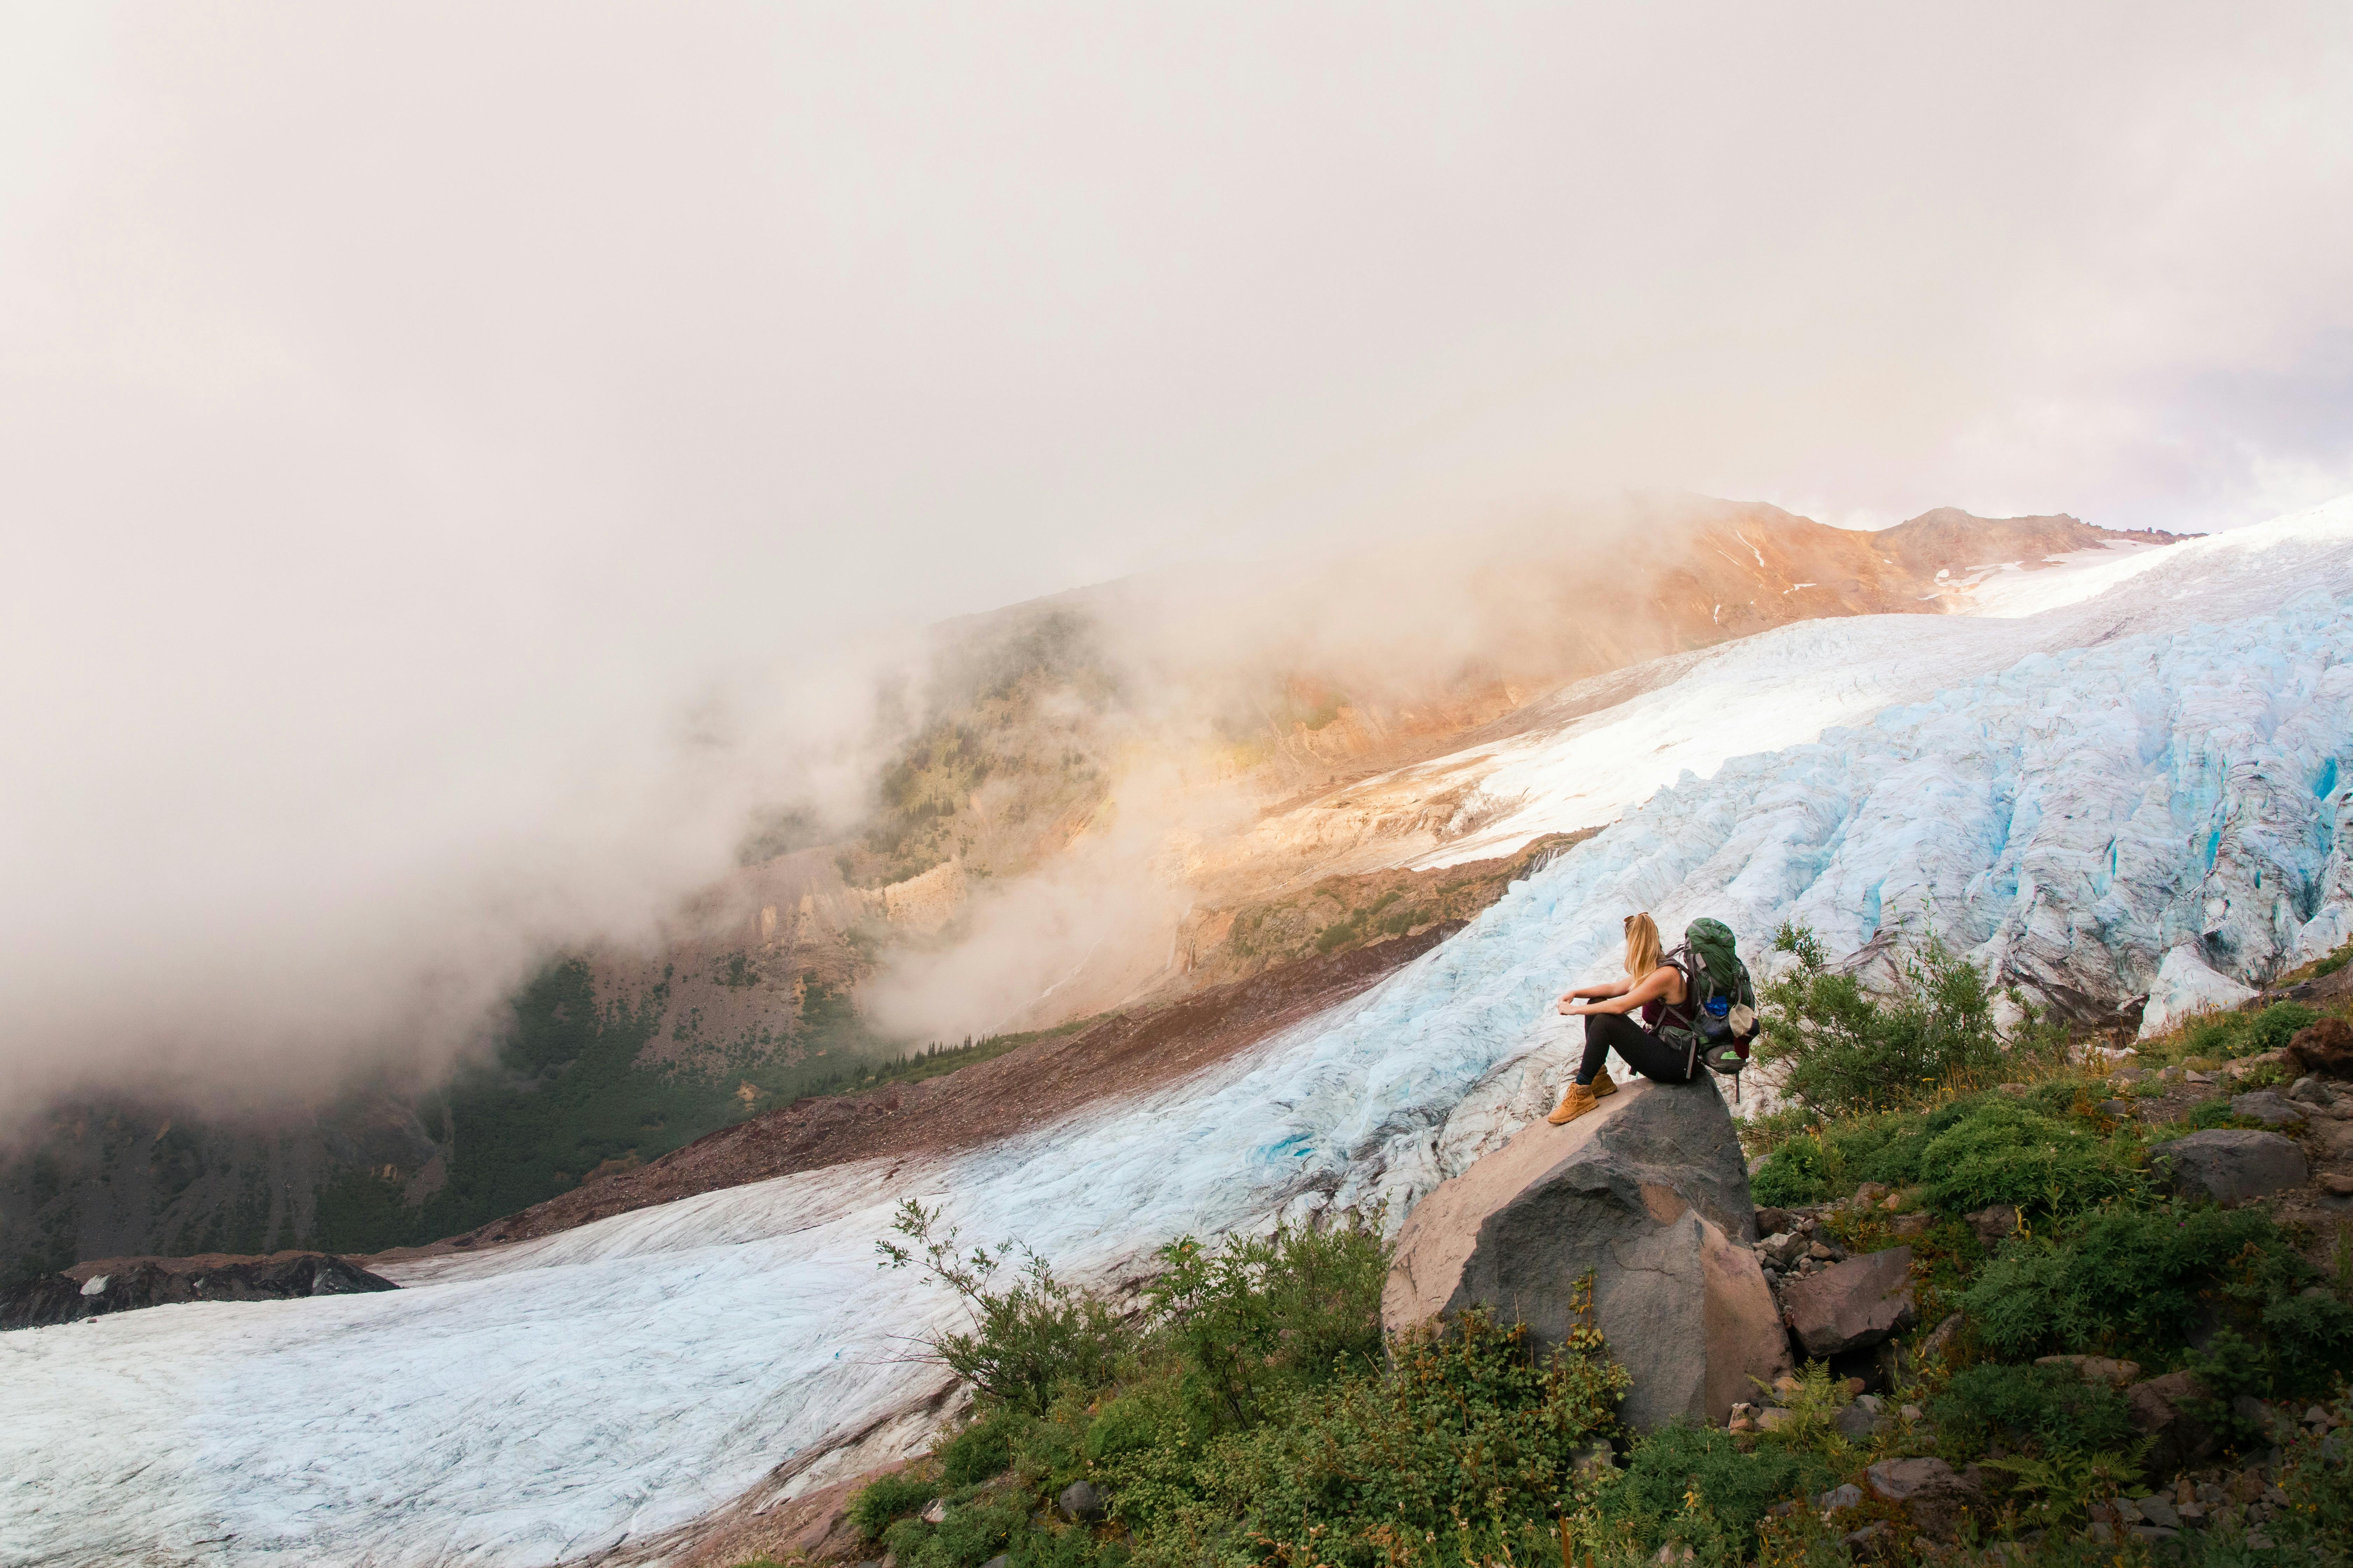 A woman sits on a boulder with her backpack on and looks out over a large snowfield. In the background, fog rolls down the hill. 